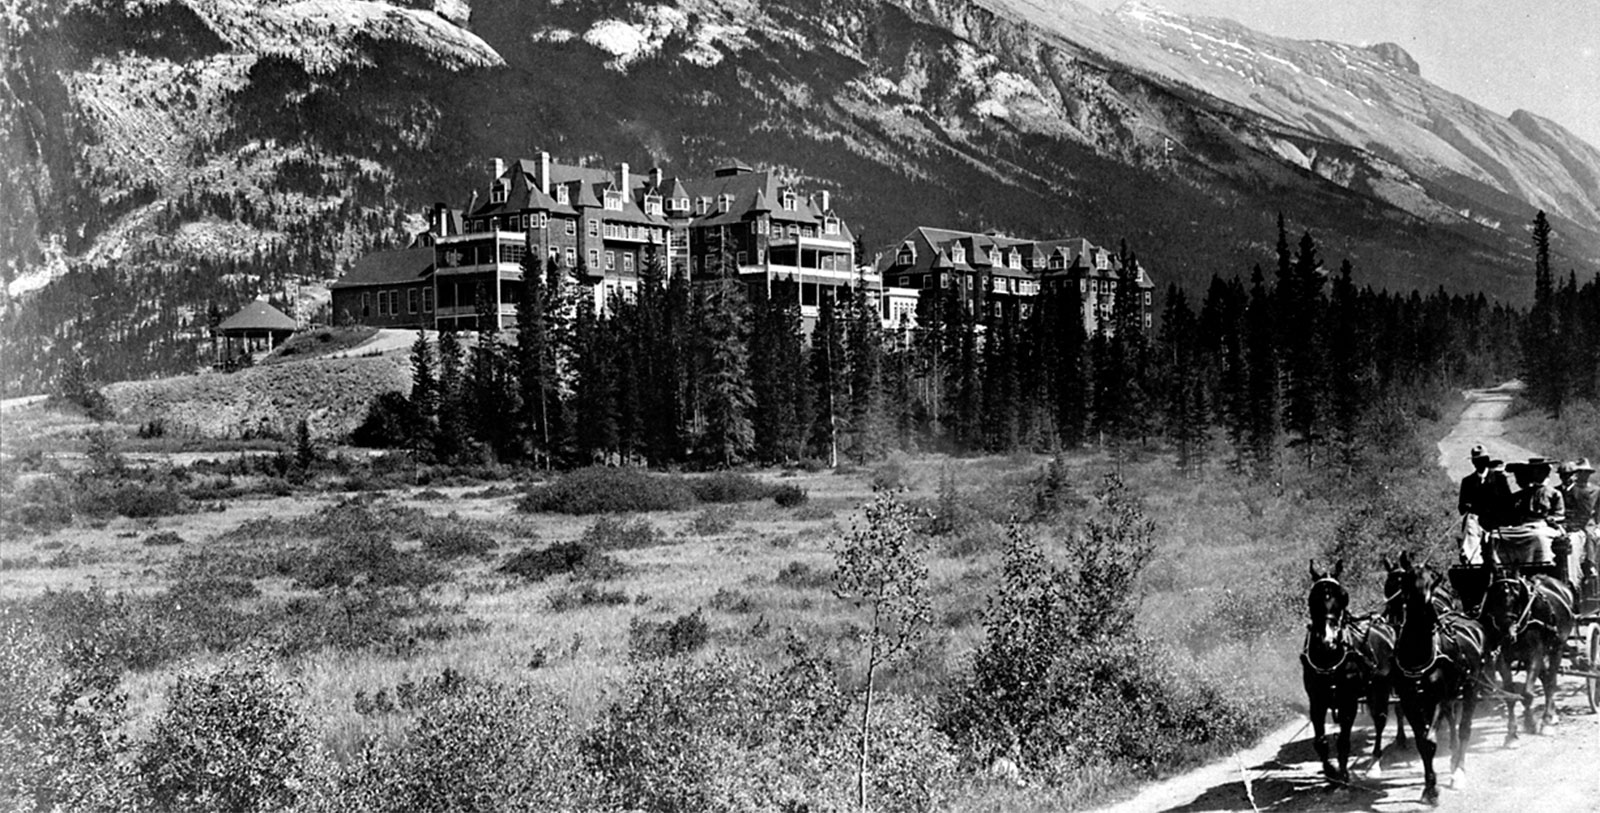 Discover the wonderful Baronial-style architecture of the Fairmont Banff Springs.